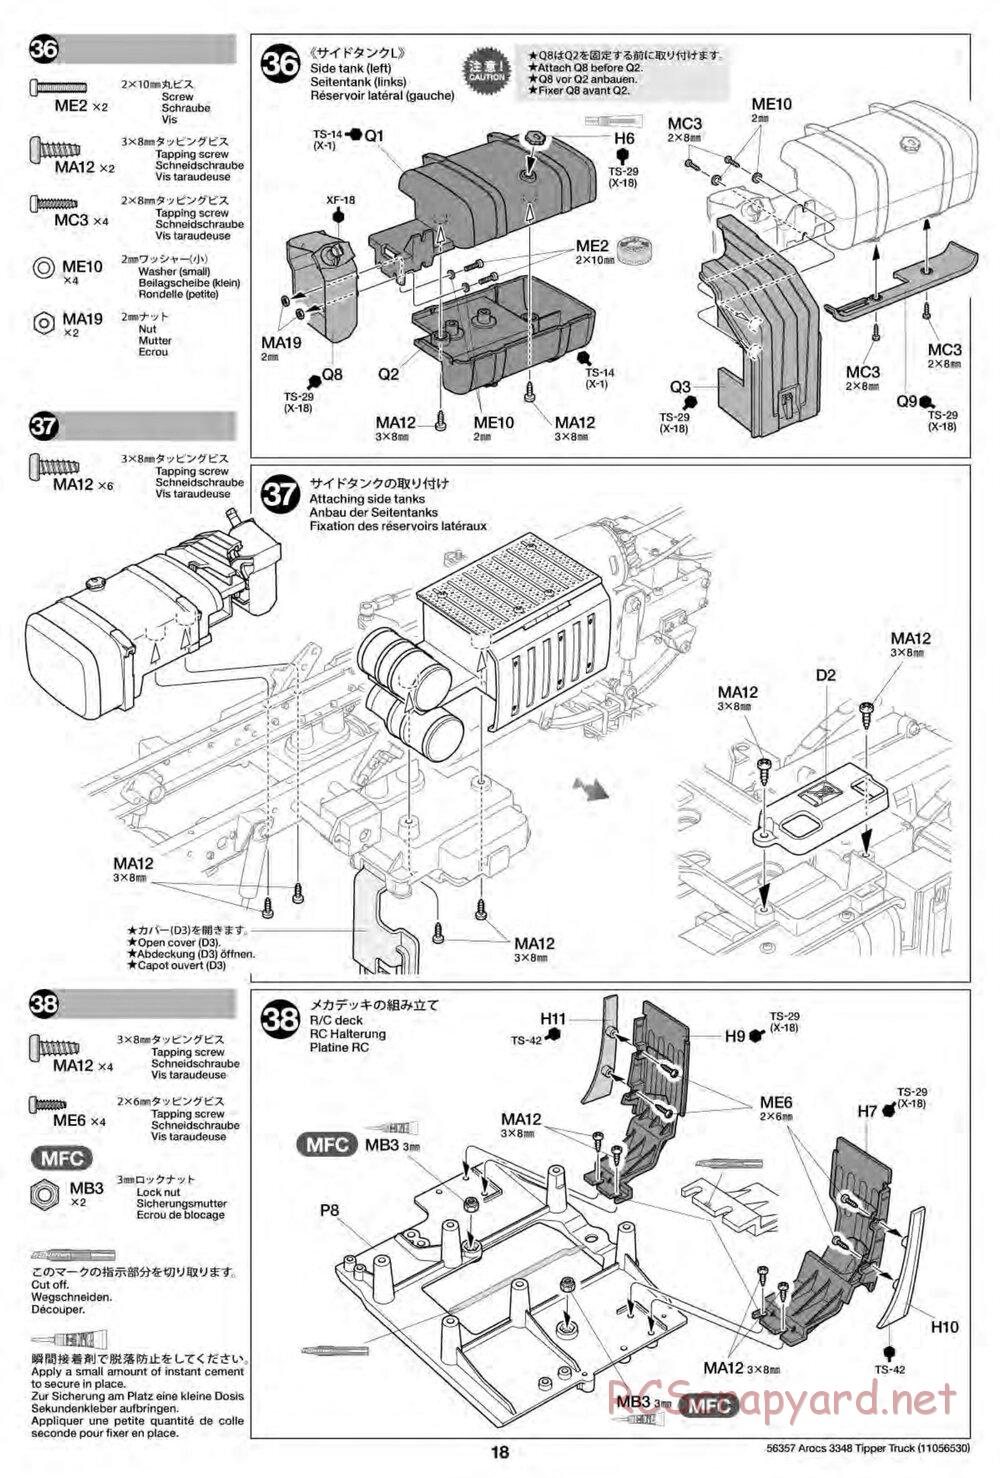 Tamiya - Mercedes-Benz Arocs 3348 6x4 Tipper Truck Chassis - Manual - Page 18